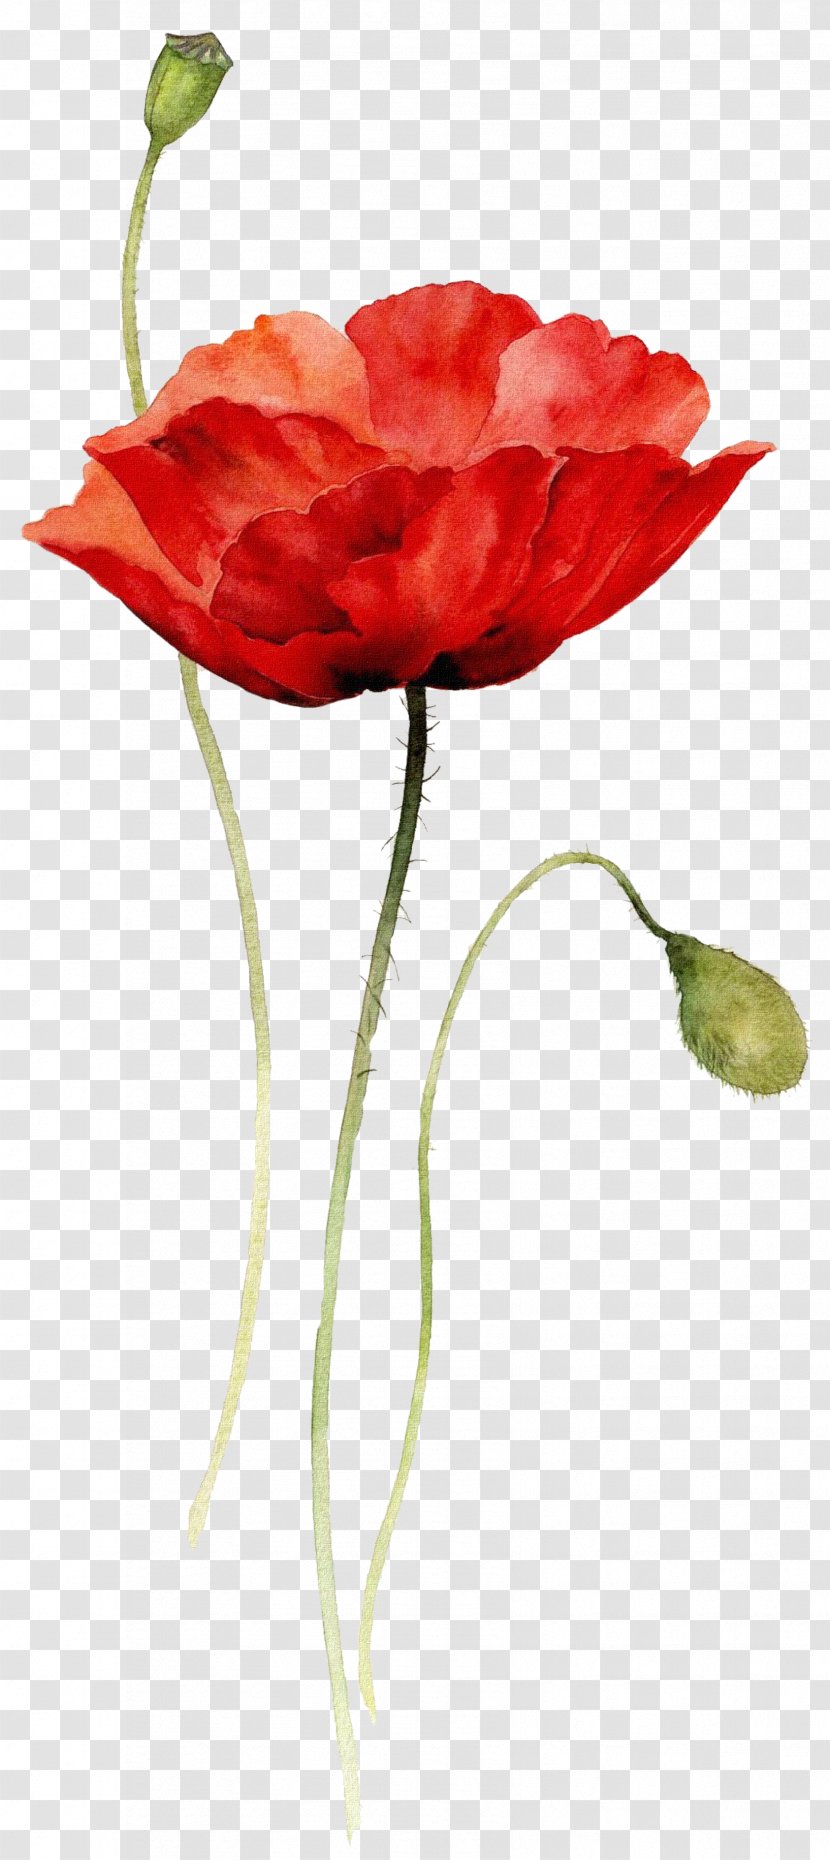 Watercolor Painting Drawing Flower Poppy - Garden Roses - Flowers Transparent PNG